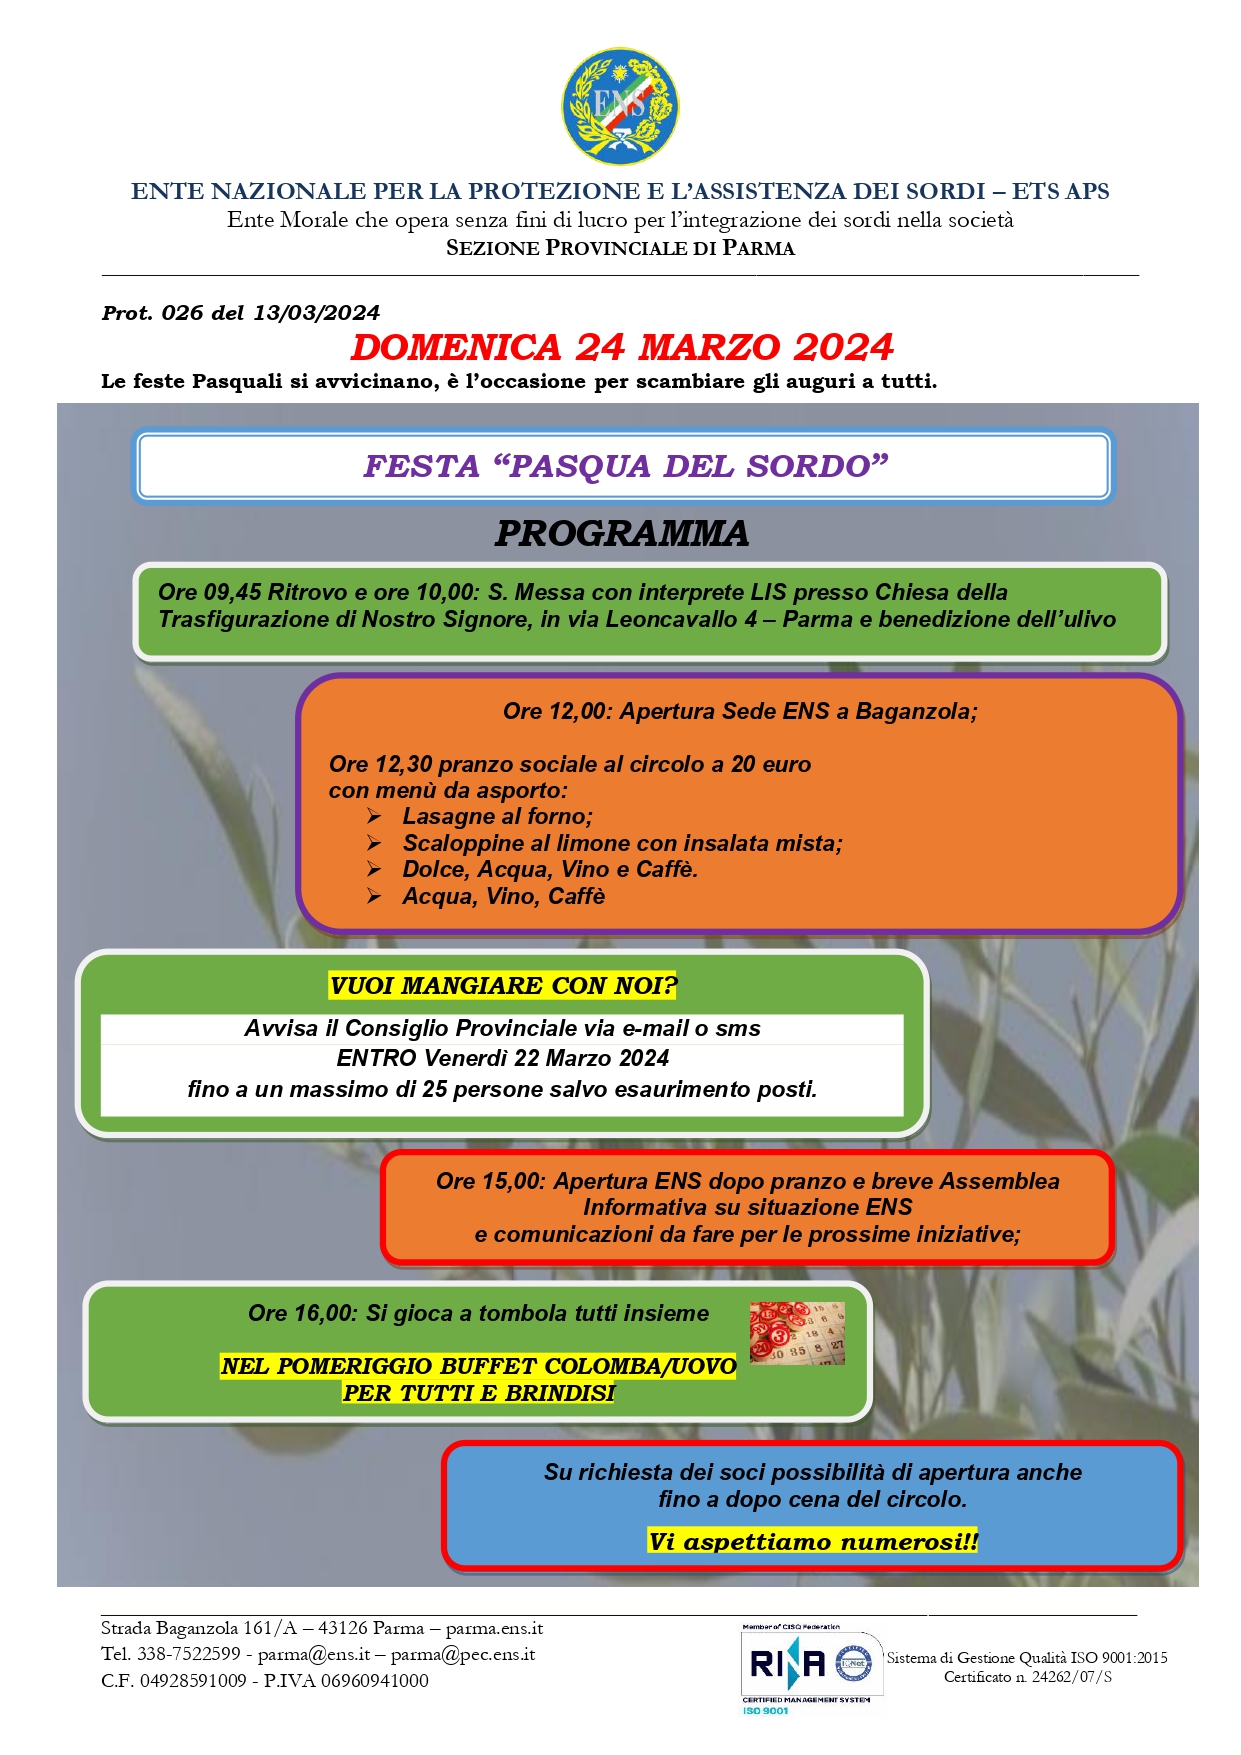 Prot. 026 Programma Domenica 24 Marzo 2024_pages-to-jpg-0001.jpg